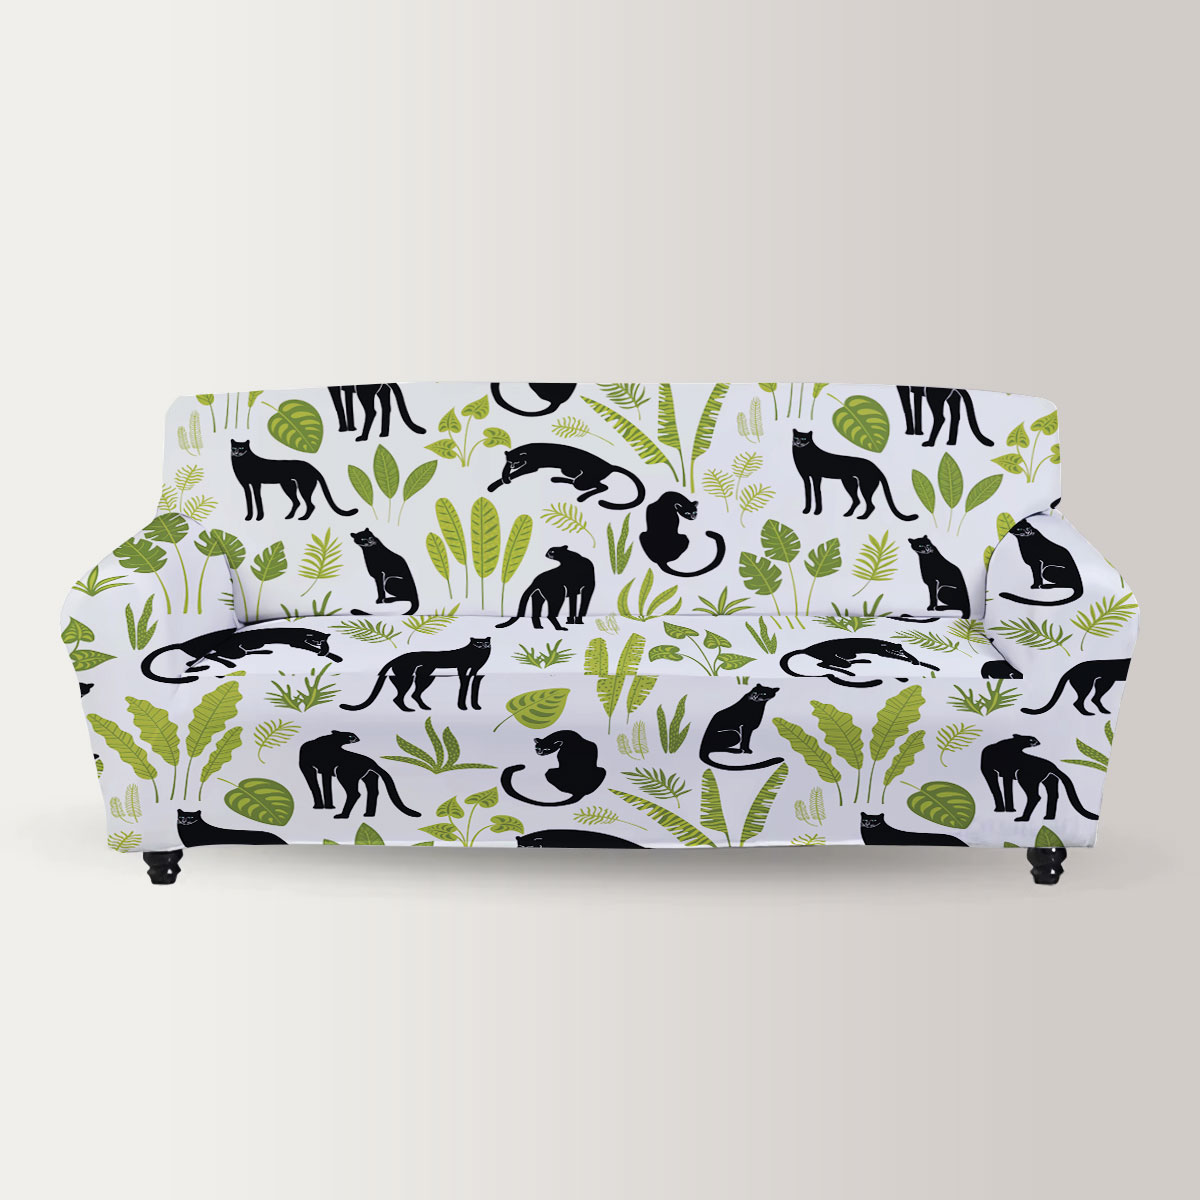 Green Leaf Black Panther Sofa Cover